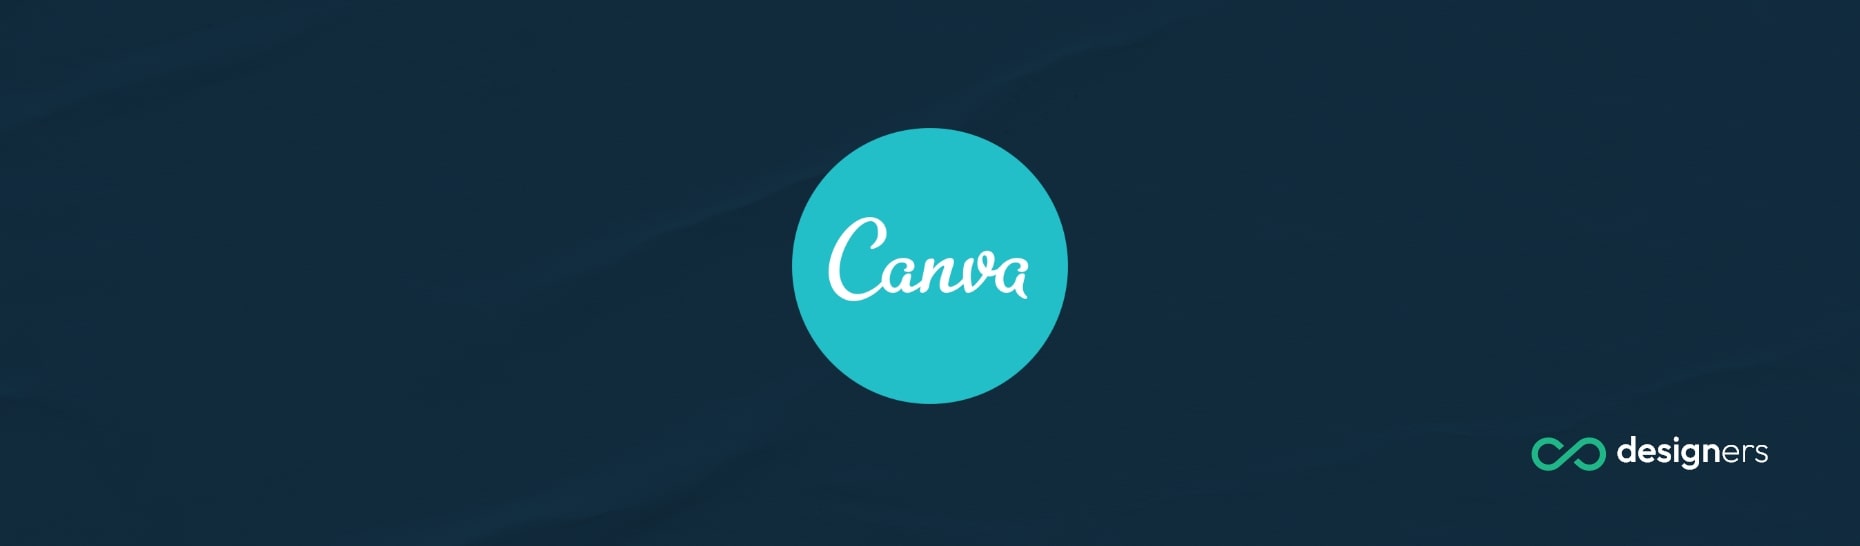 Canva doesn't start Downloading My Design?